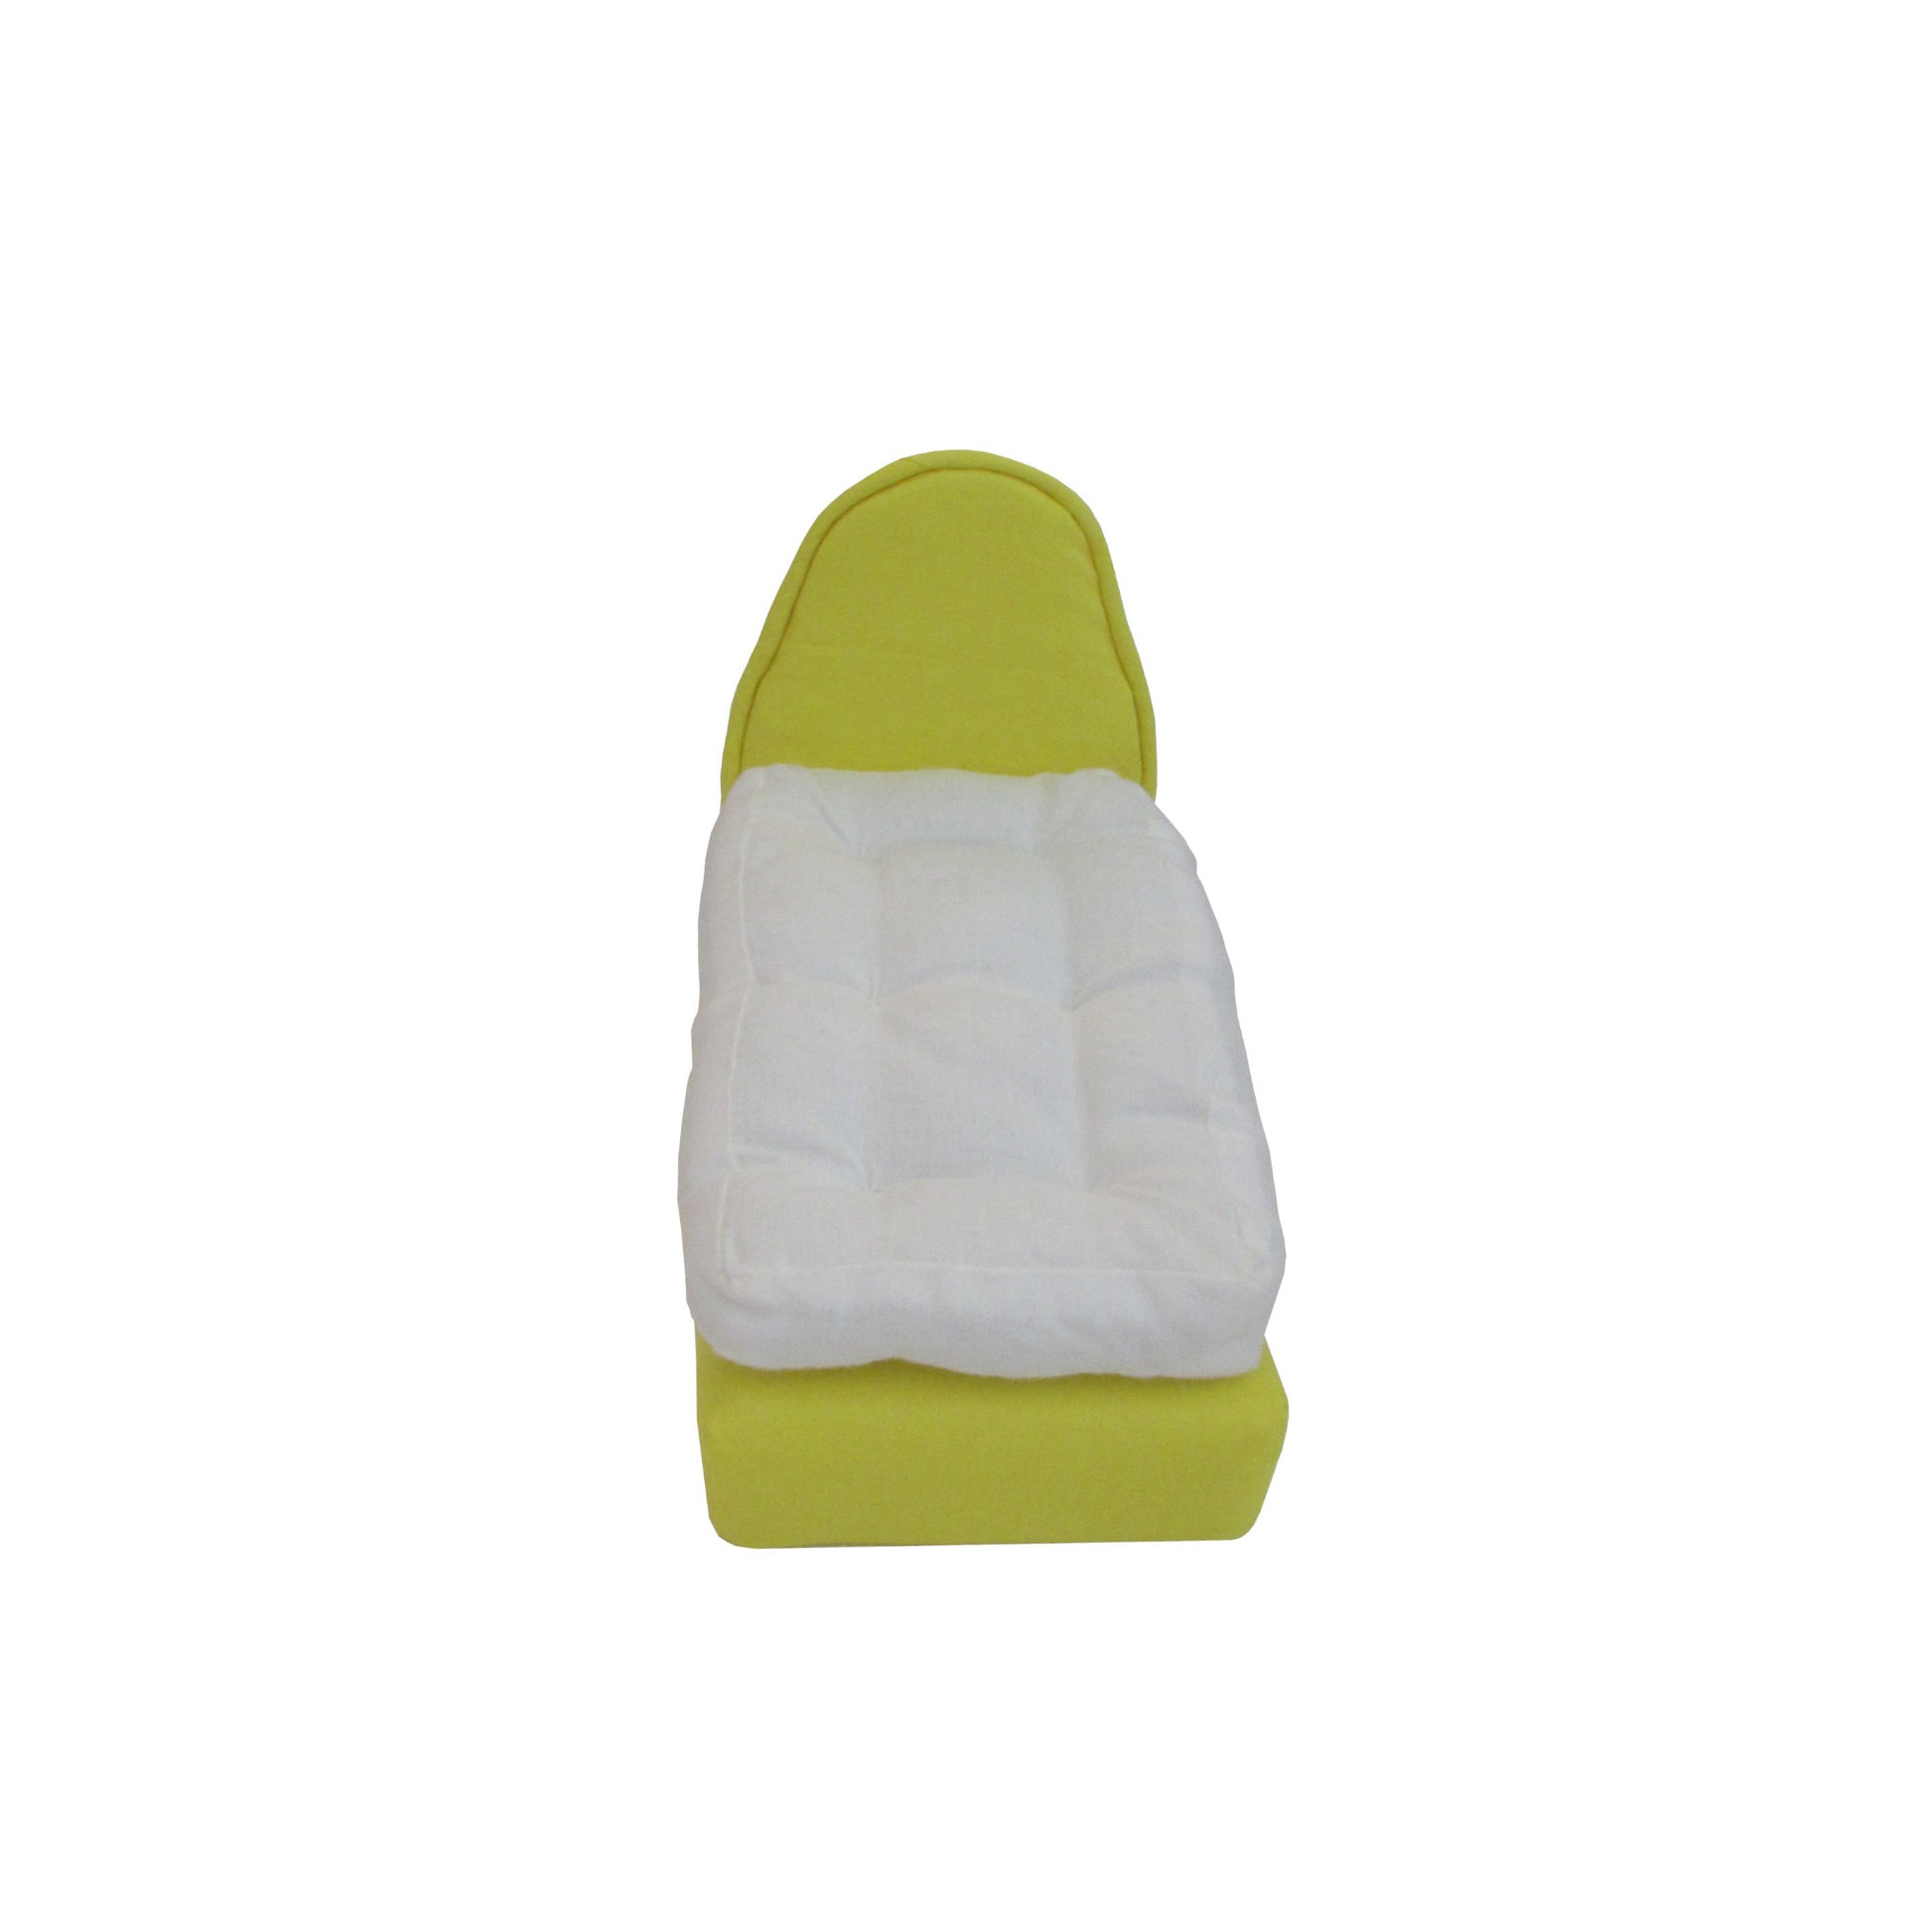 Bright Yellow Doll Bed and Mattress for 6.5-inch dolls